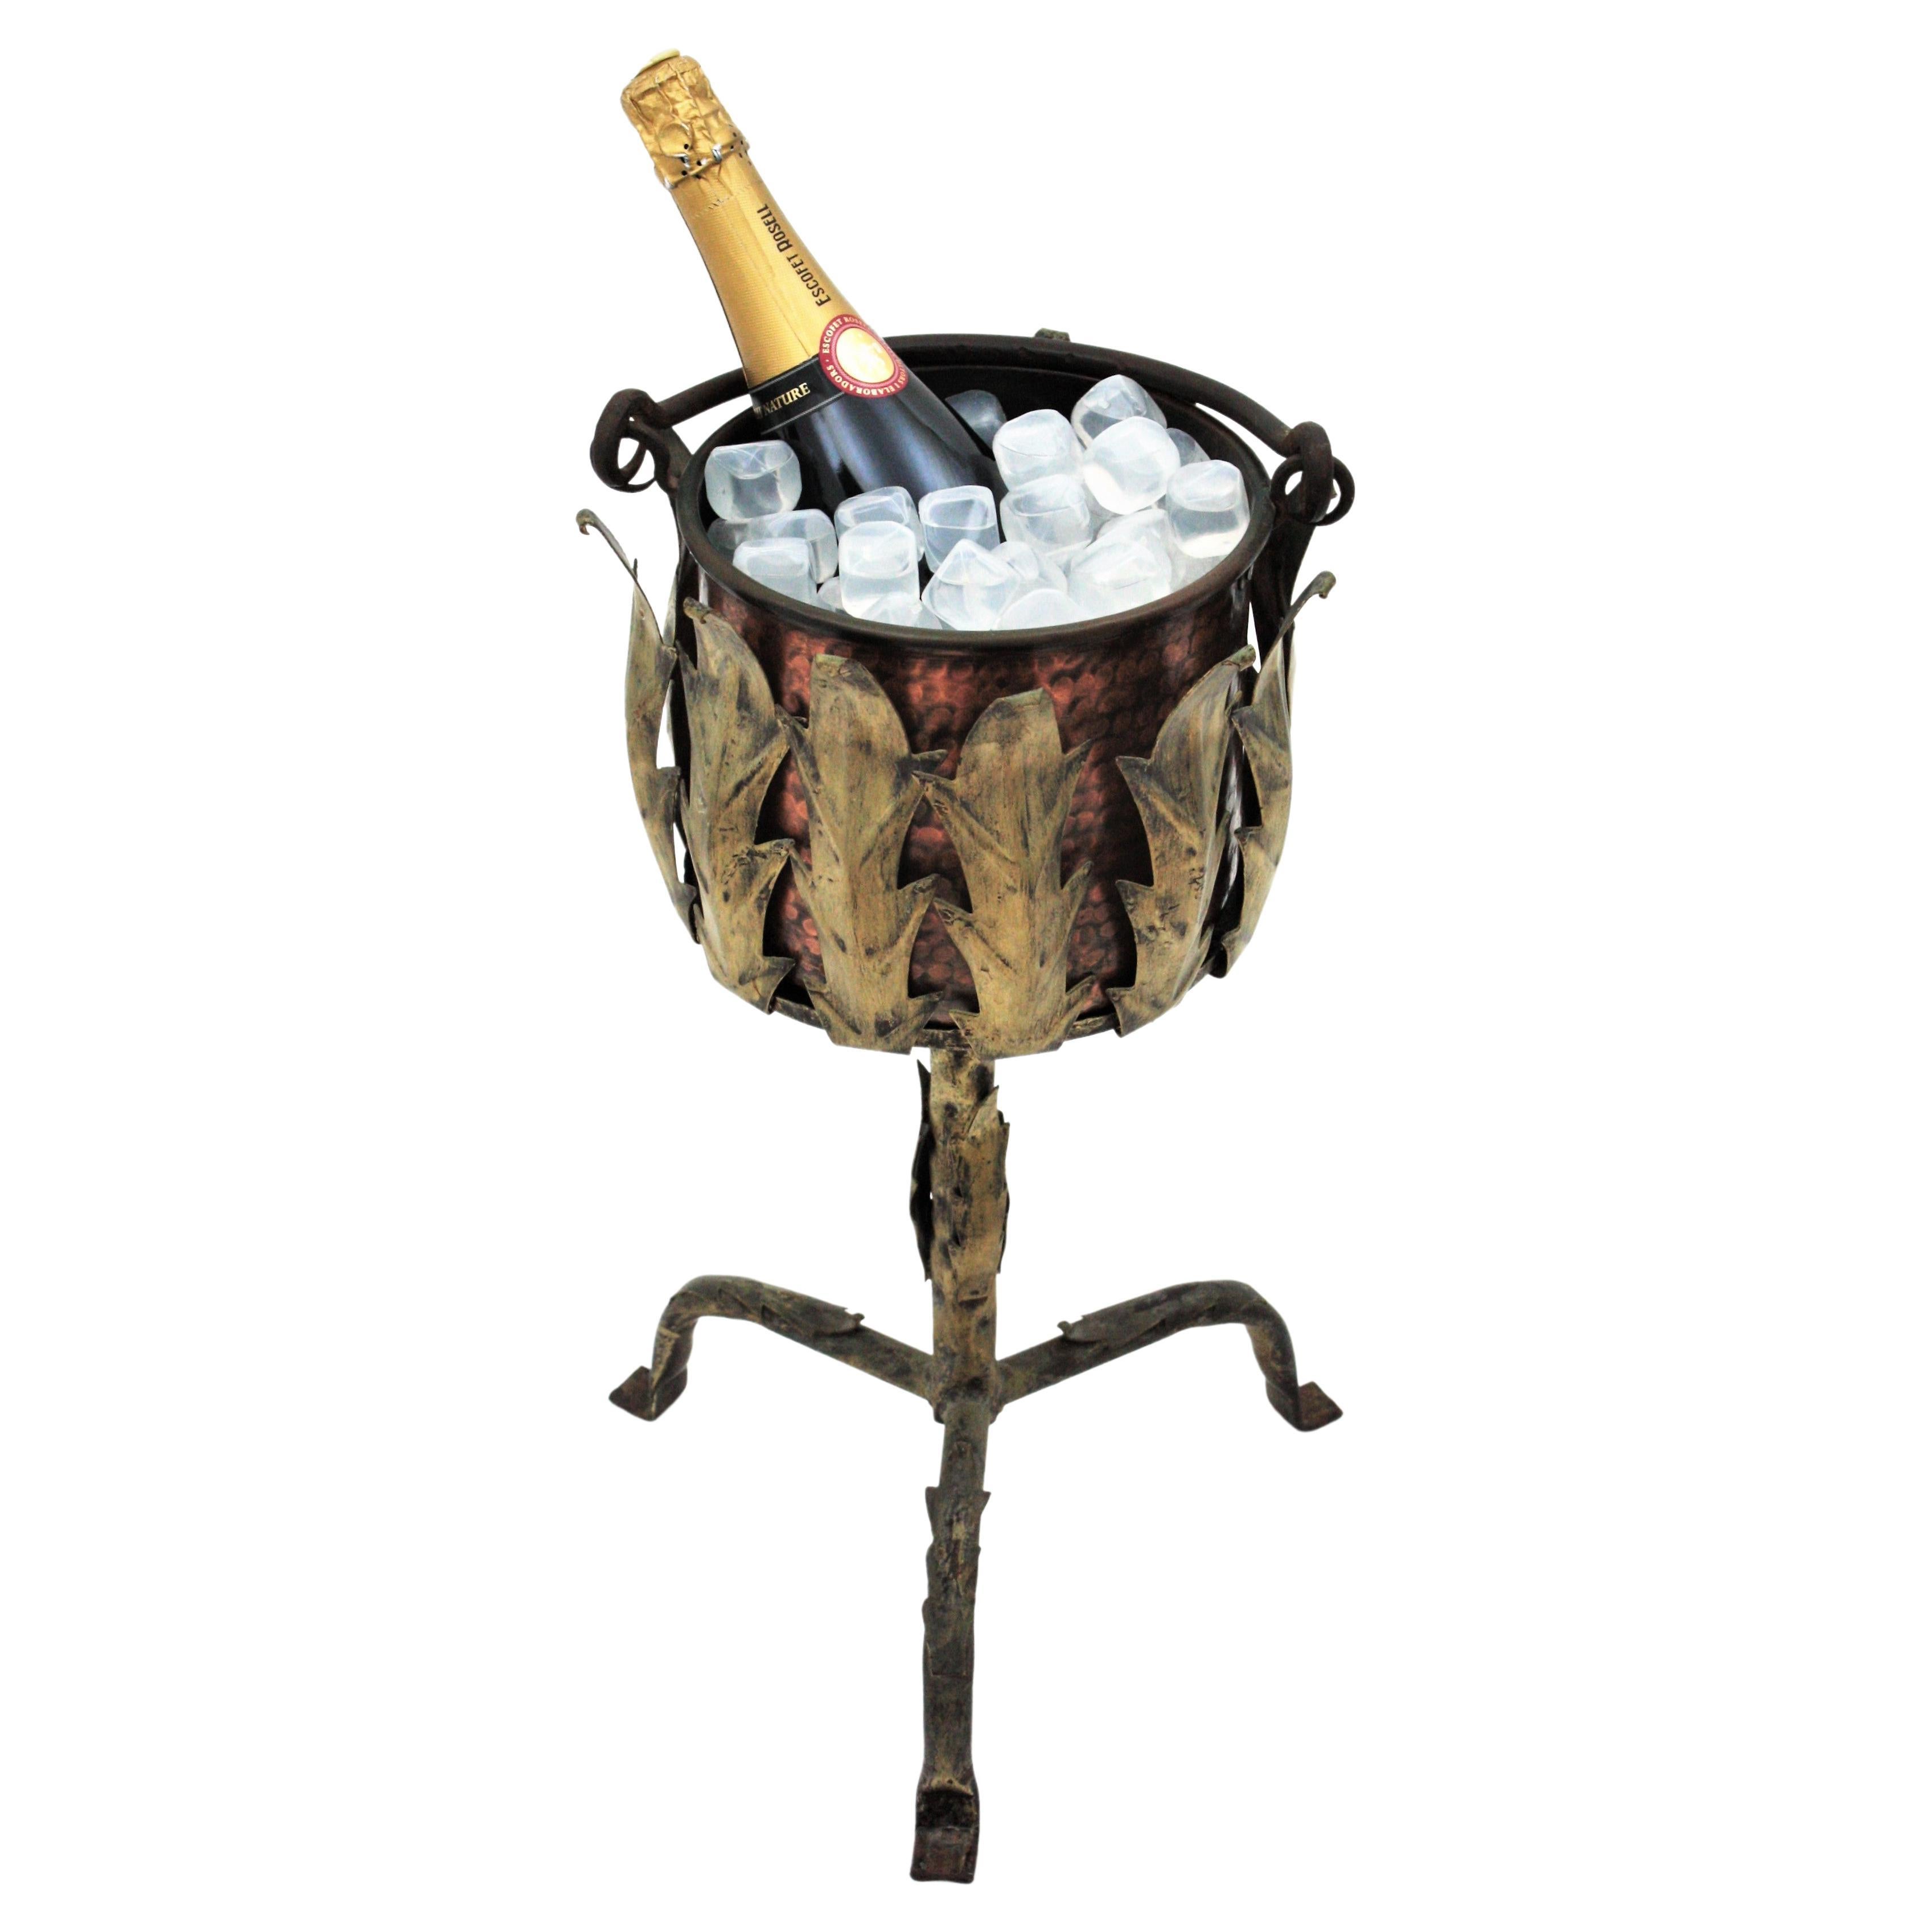 Foliage hand forged iron tripod stand with hand-hammered copper ice bucket, Spain, 1940s.
This pedestal champagne or wine serving stand is all made by hand. The handwrought leafed iron stand stands up on a tripod base with foliage decorative